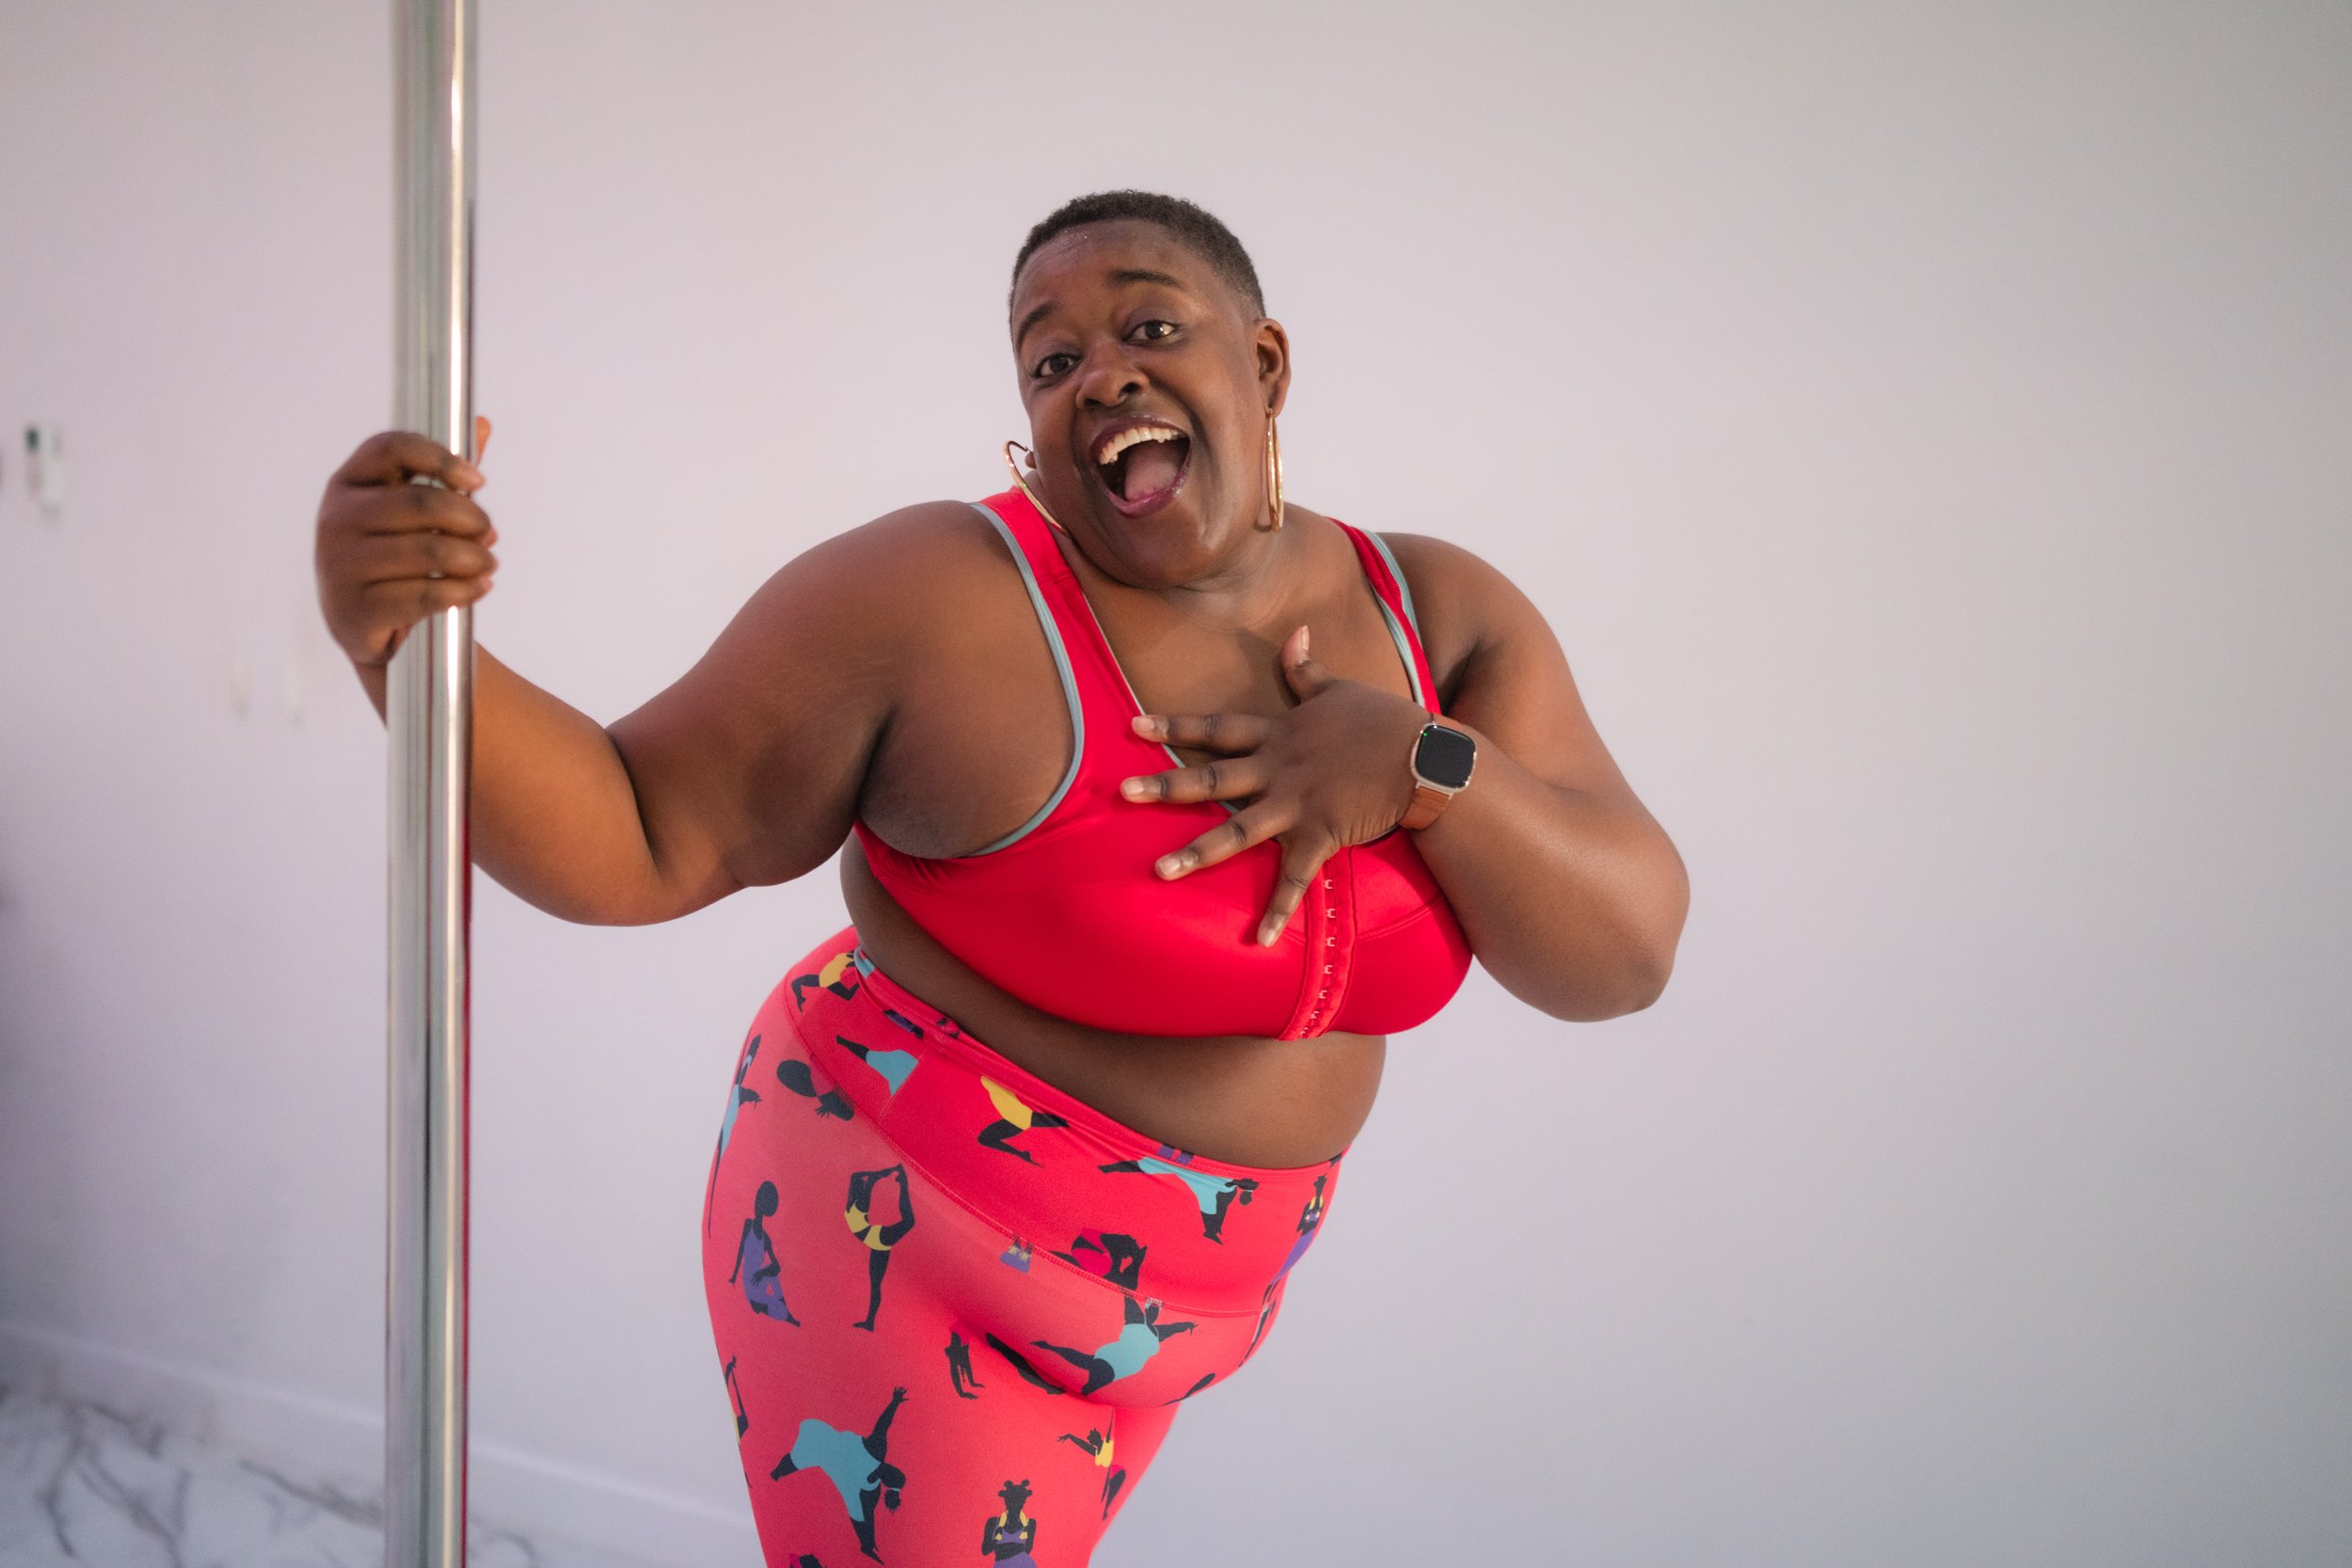 alexander trapp recommends fat woman pole dancing pic